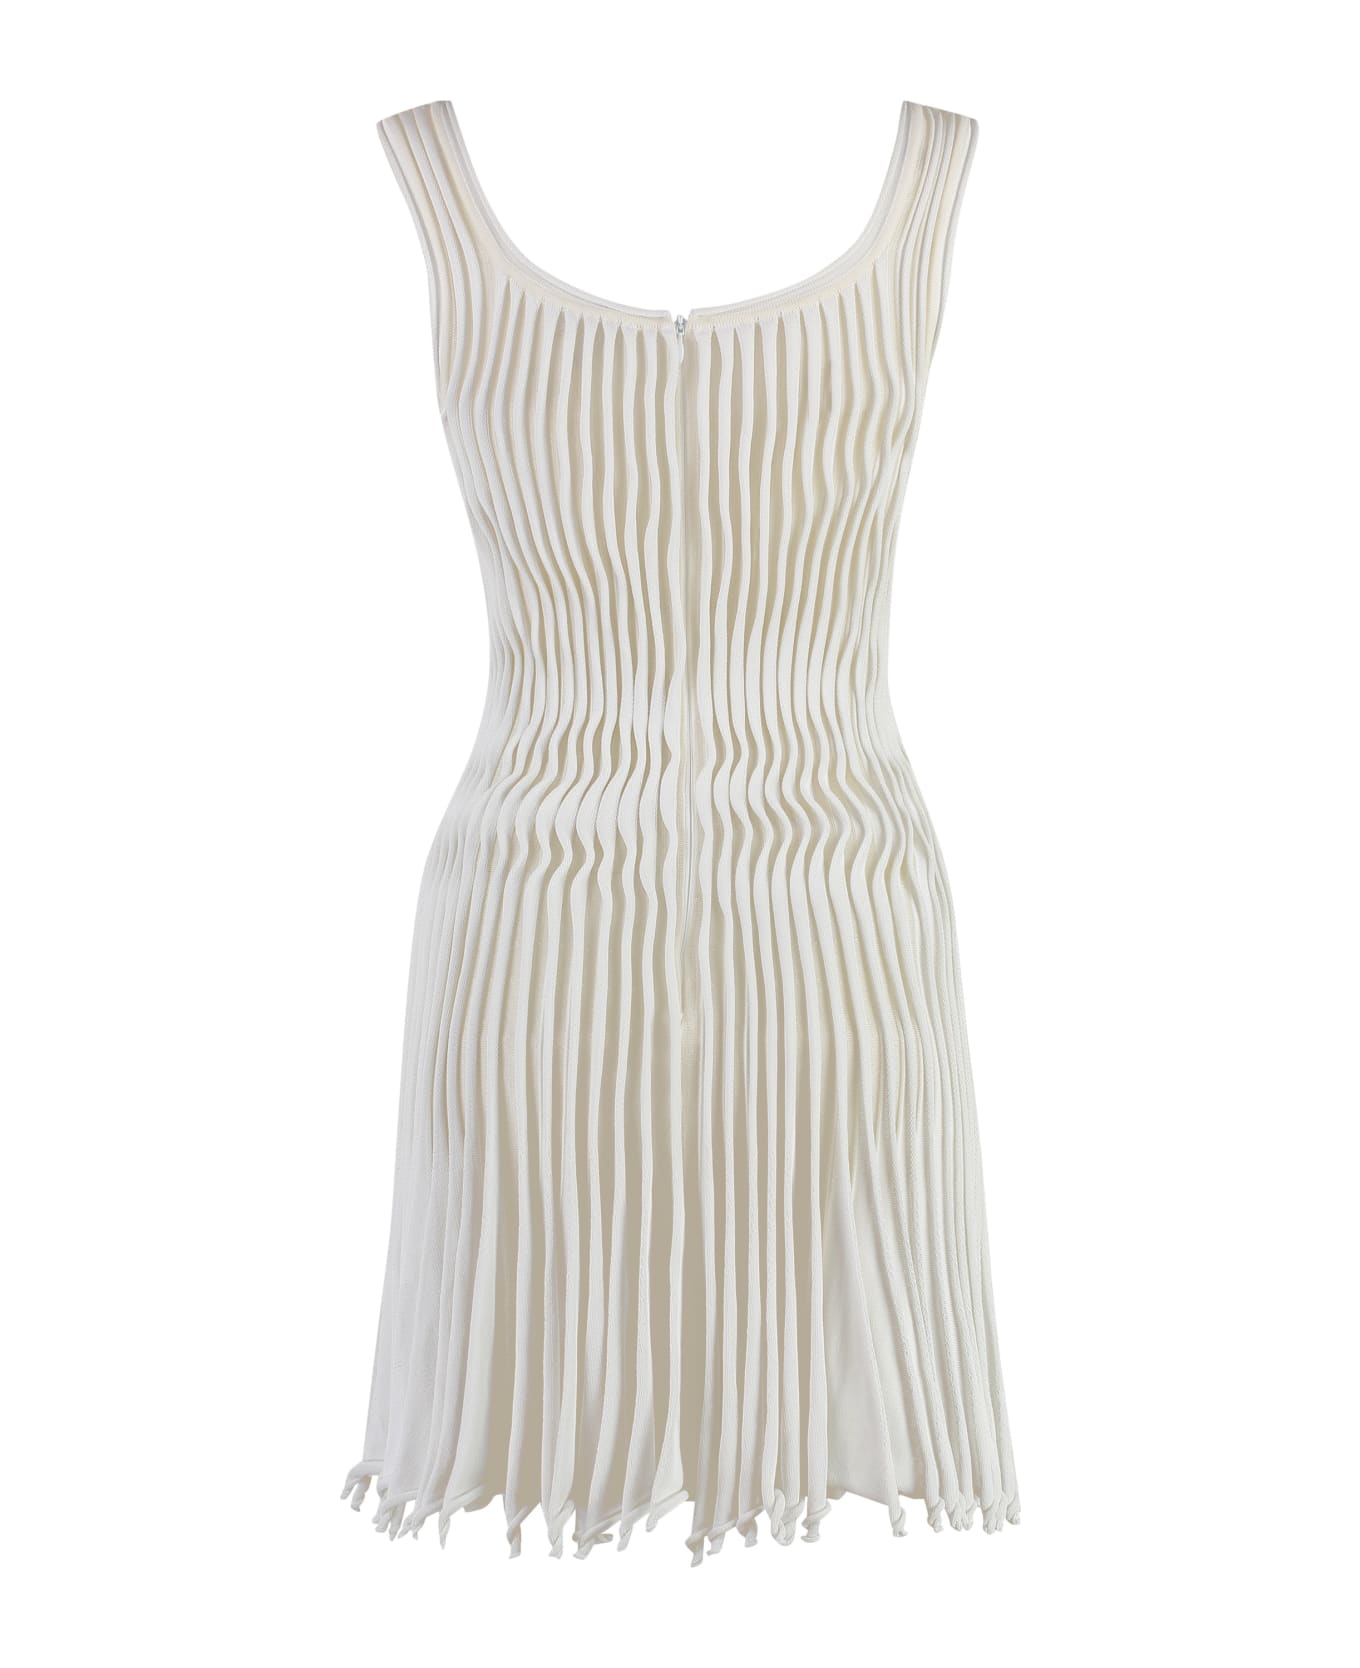 Alaia Knitted Dress - White